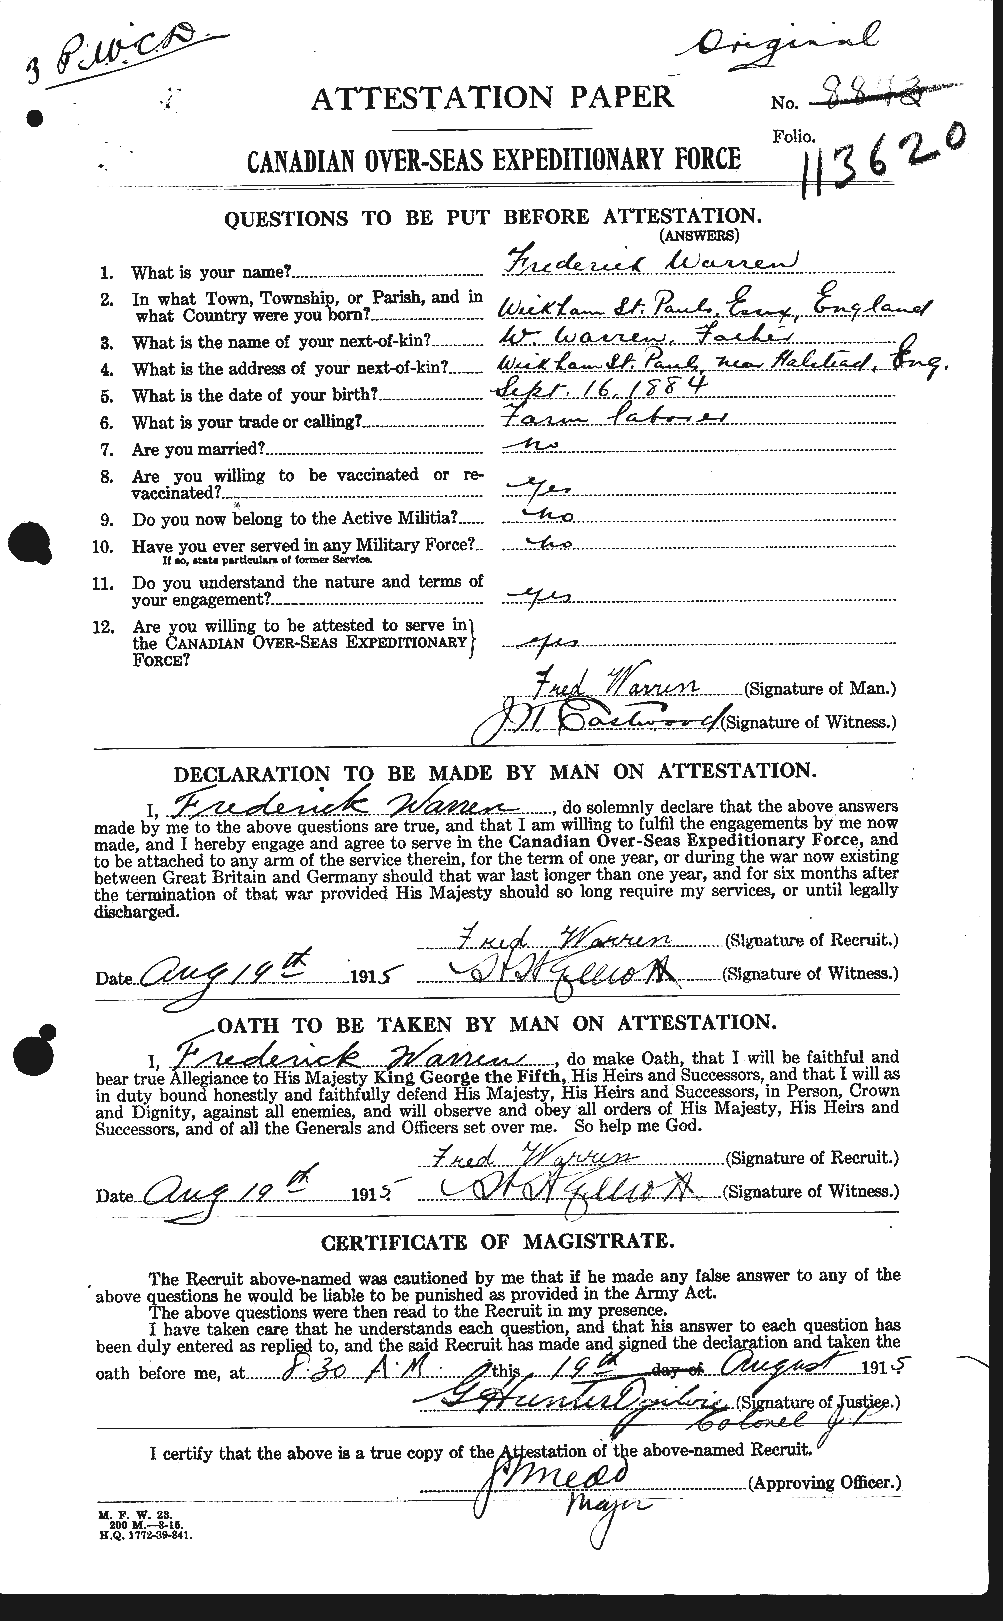 Personnel Records of the First World War - CEF 658441a